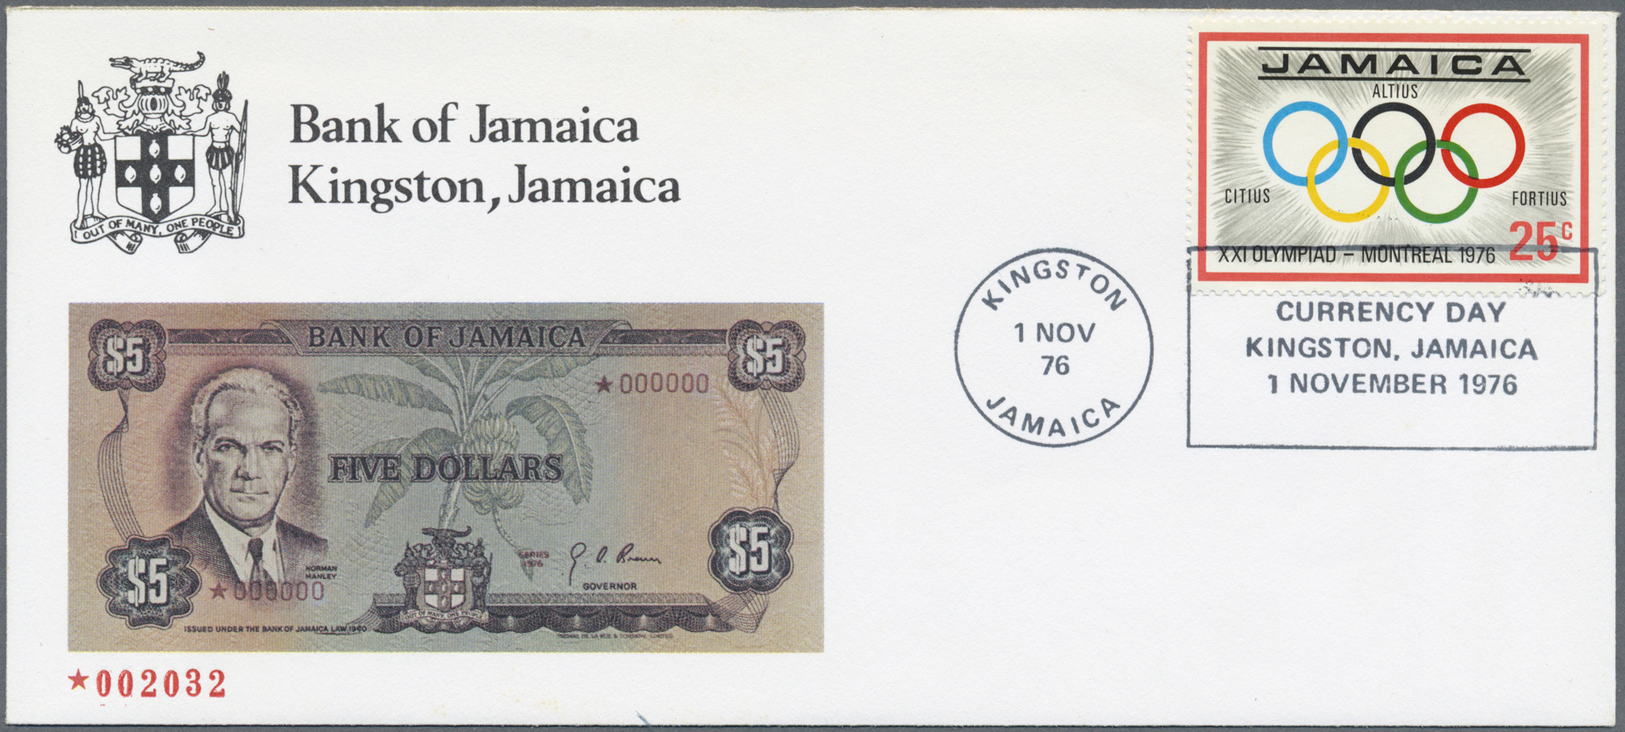 01299 Jamaica: Offical First Day Cover Album Of The Bank Of Jamaica, With Certificate, Containing 4 First Day Covers Wit - Jamaica